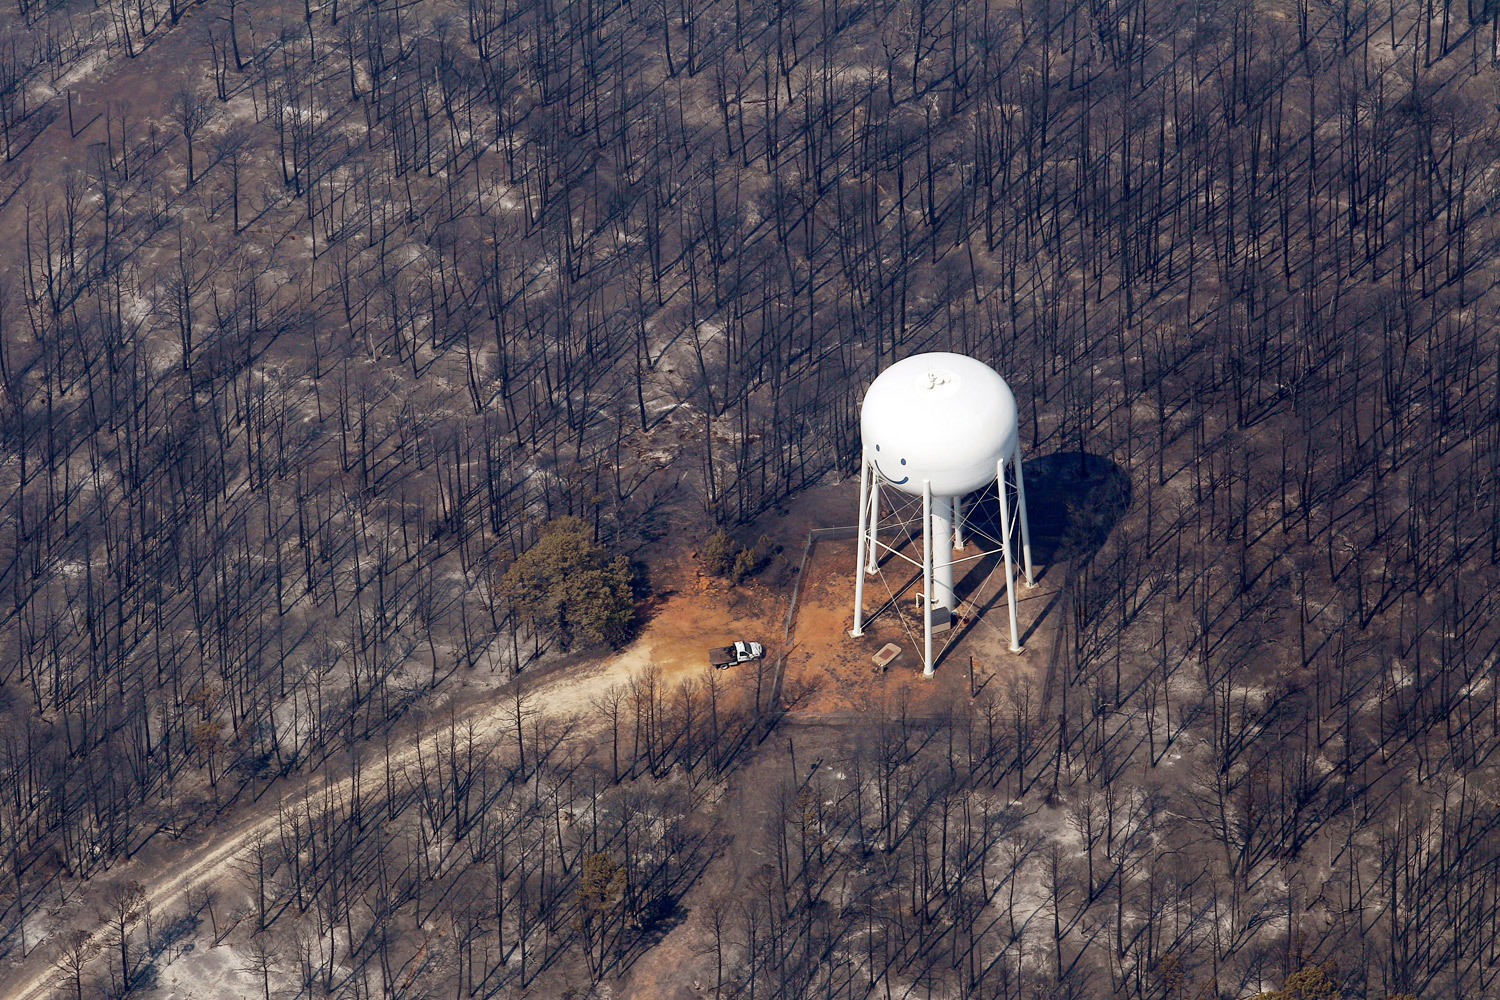 September 7, 2011. An area destroyed by wildfire surrounds a water tower in Bastrop, Texas. The fire has destroyed more than 600 homes and blackened about 45 square miles in and around Bastrop.